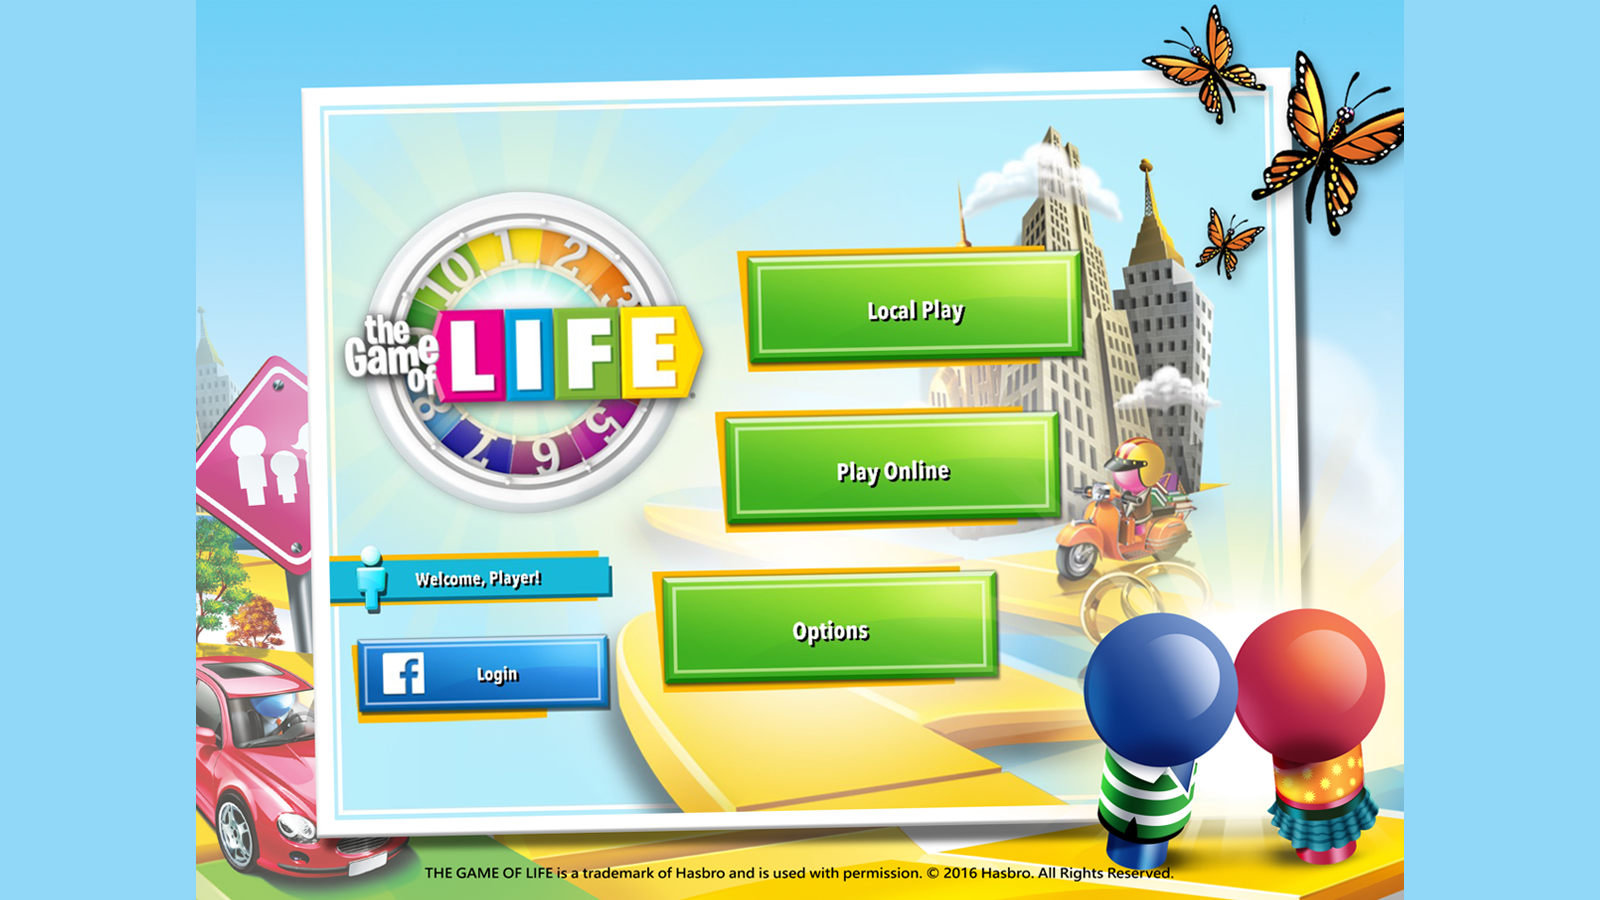 The Game of Life main screen with game options